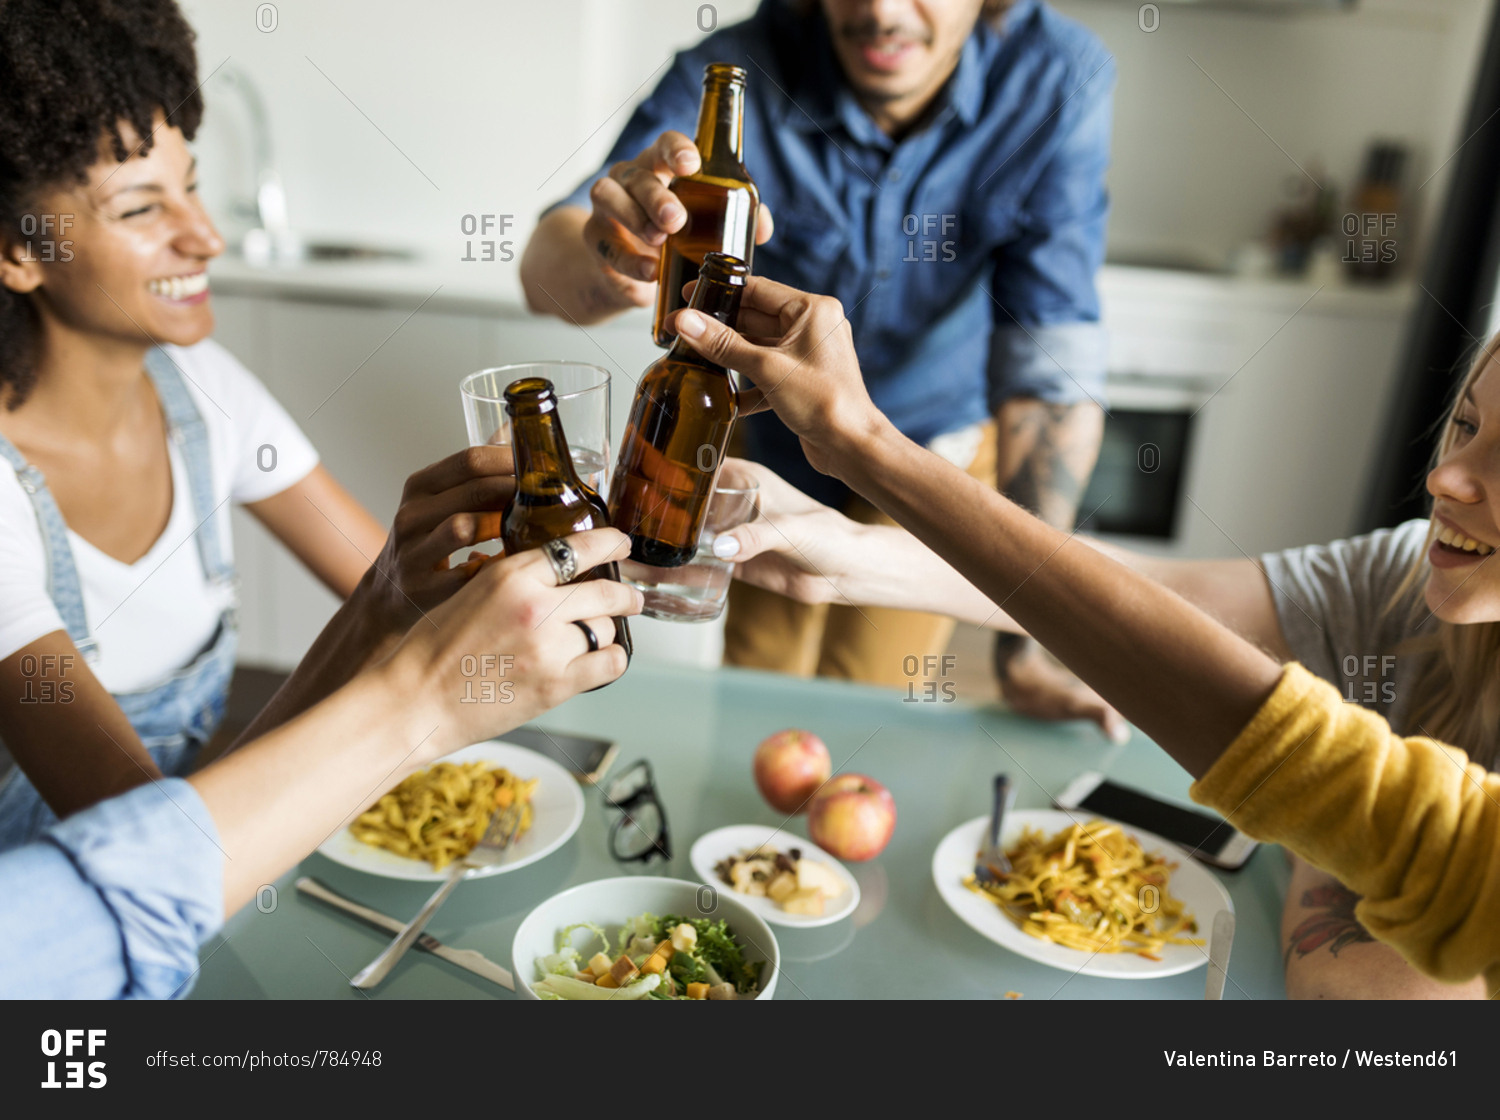 Cheerful friends clinking beer bottles at dining table